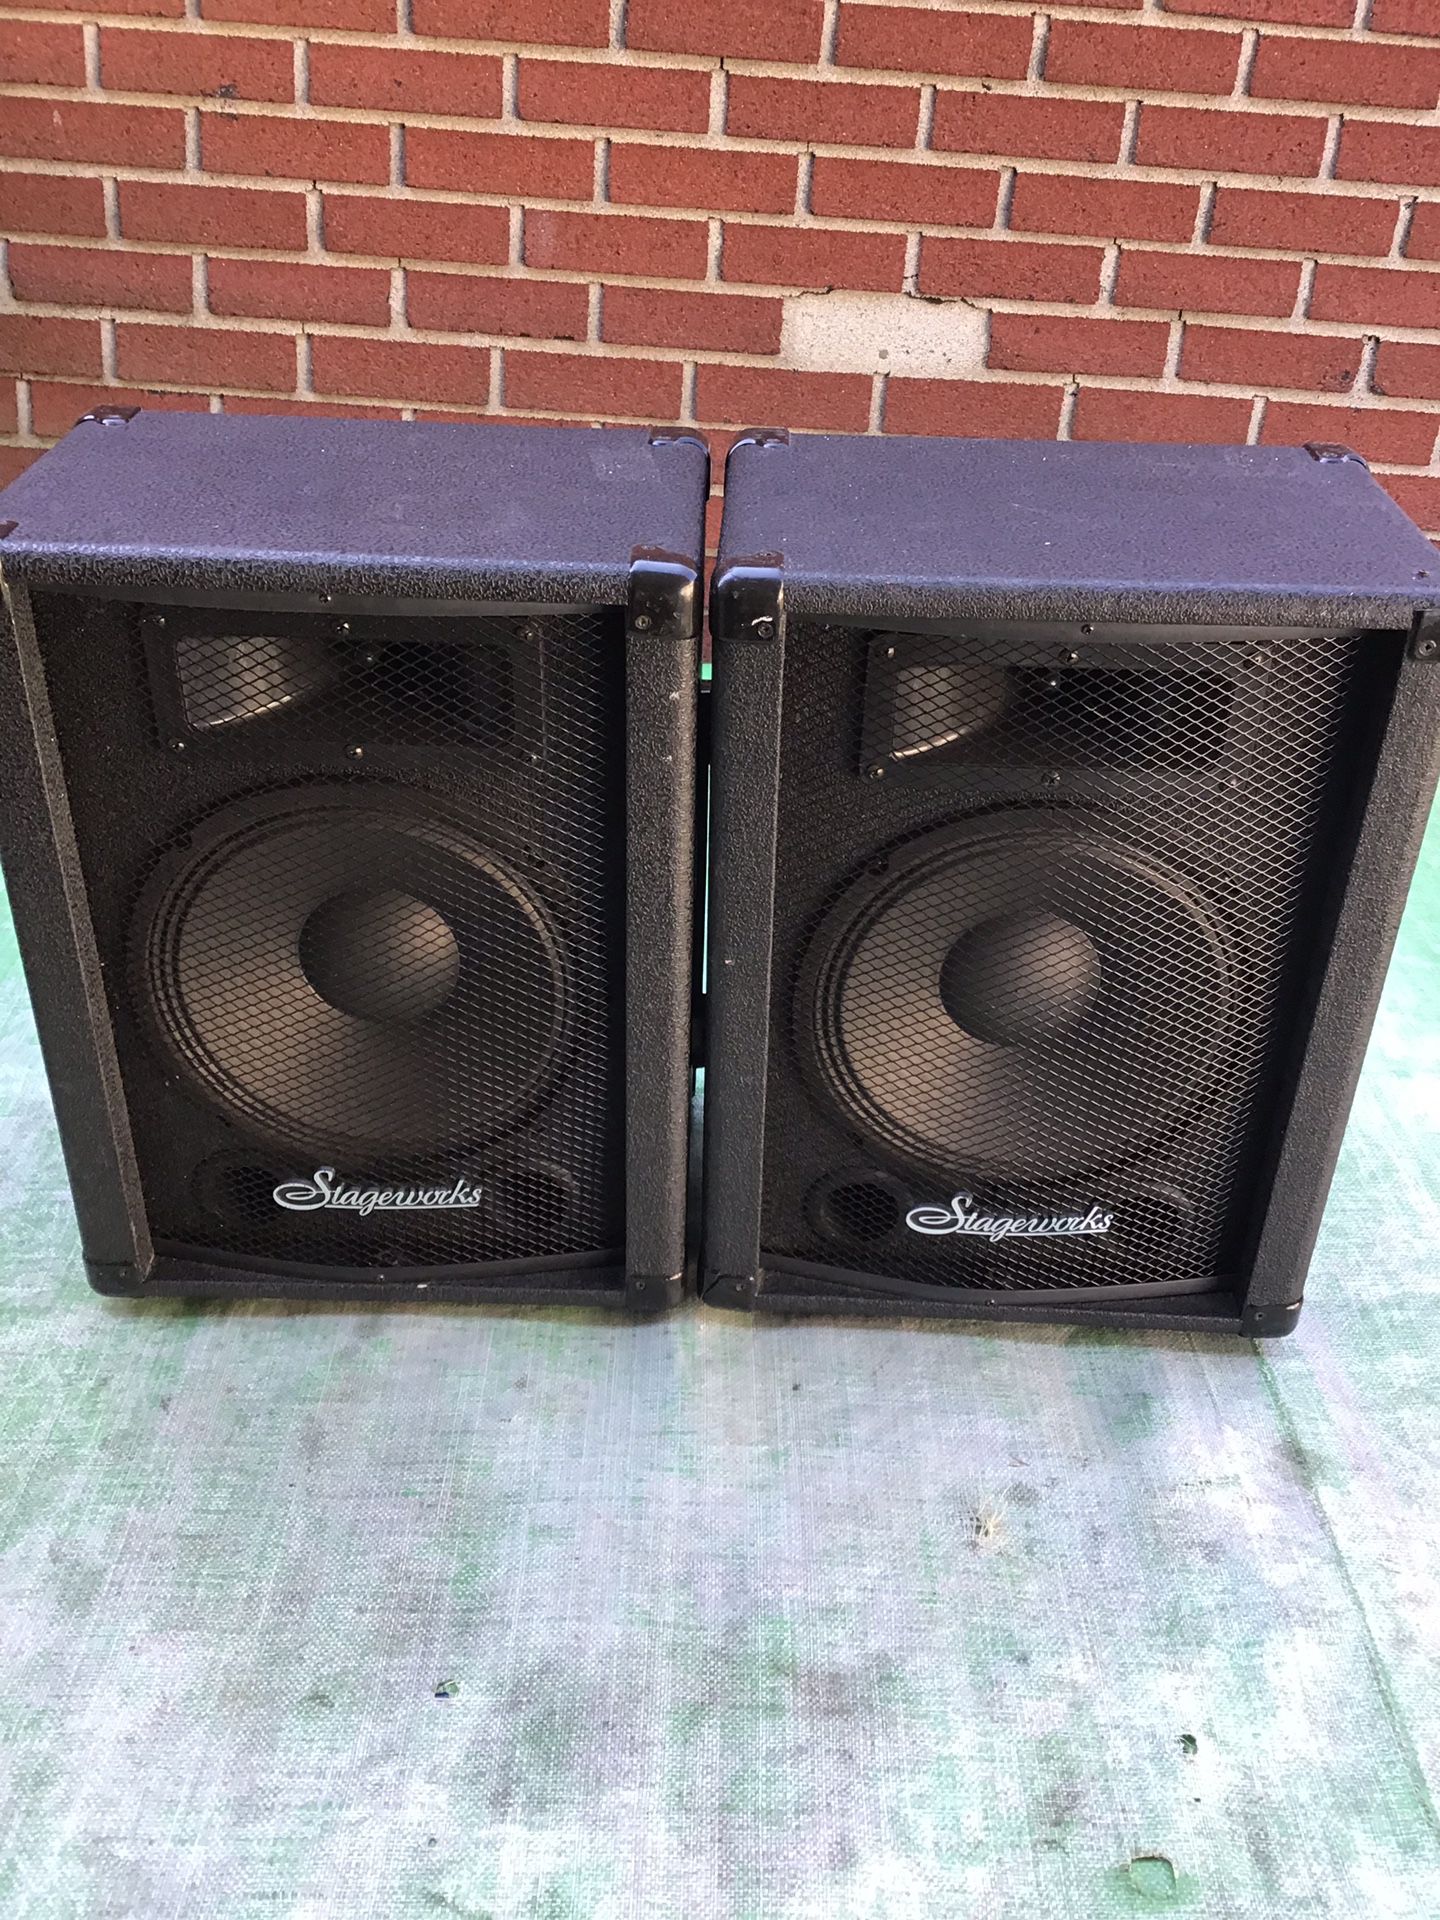 Stagewords Model LG-10 PA Speakers Speaker Pair 60W / 120W 8ohm - Live Audio 60 Watts per speaker, with a total of 120 Watts. Some more specs are: